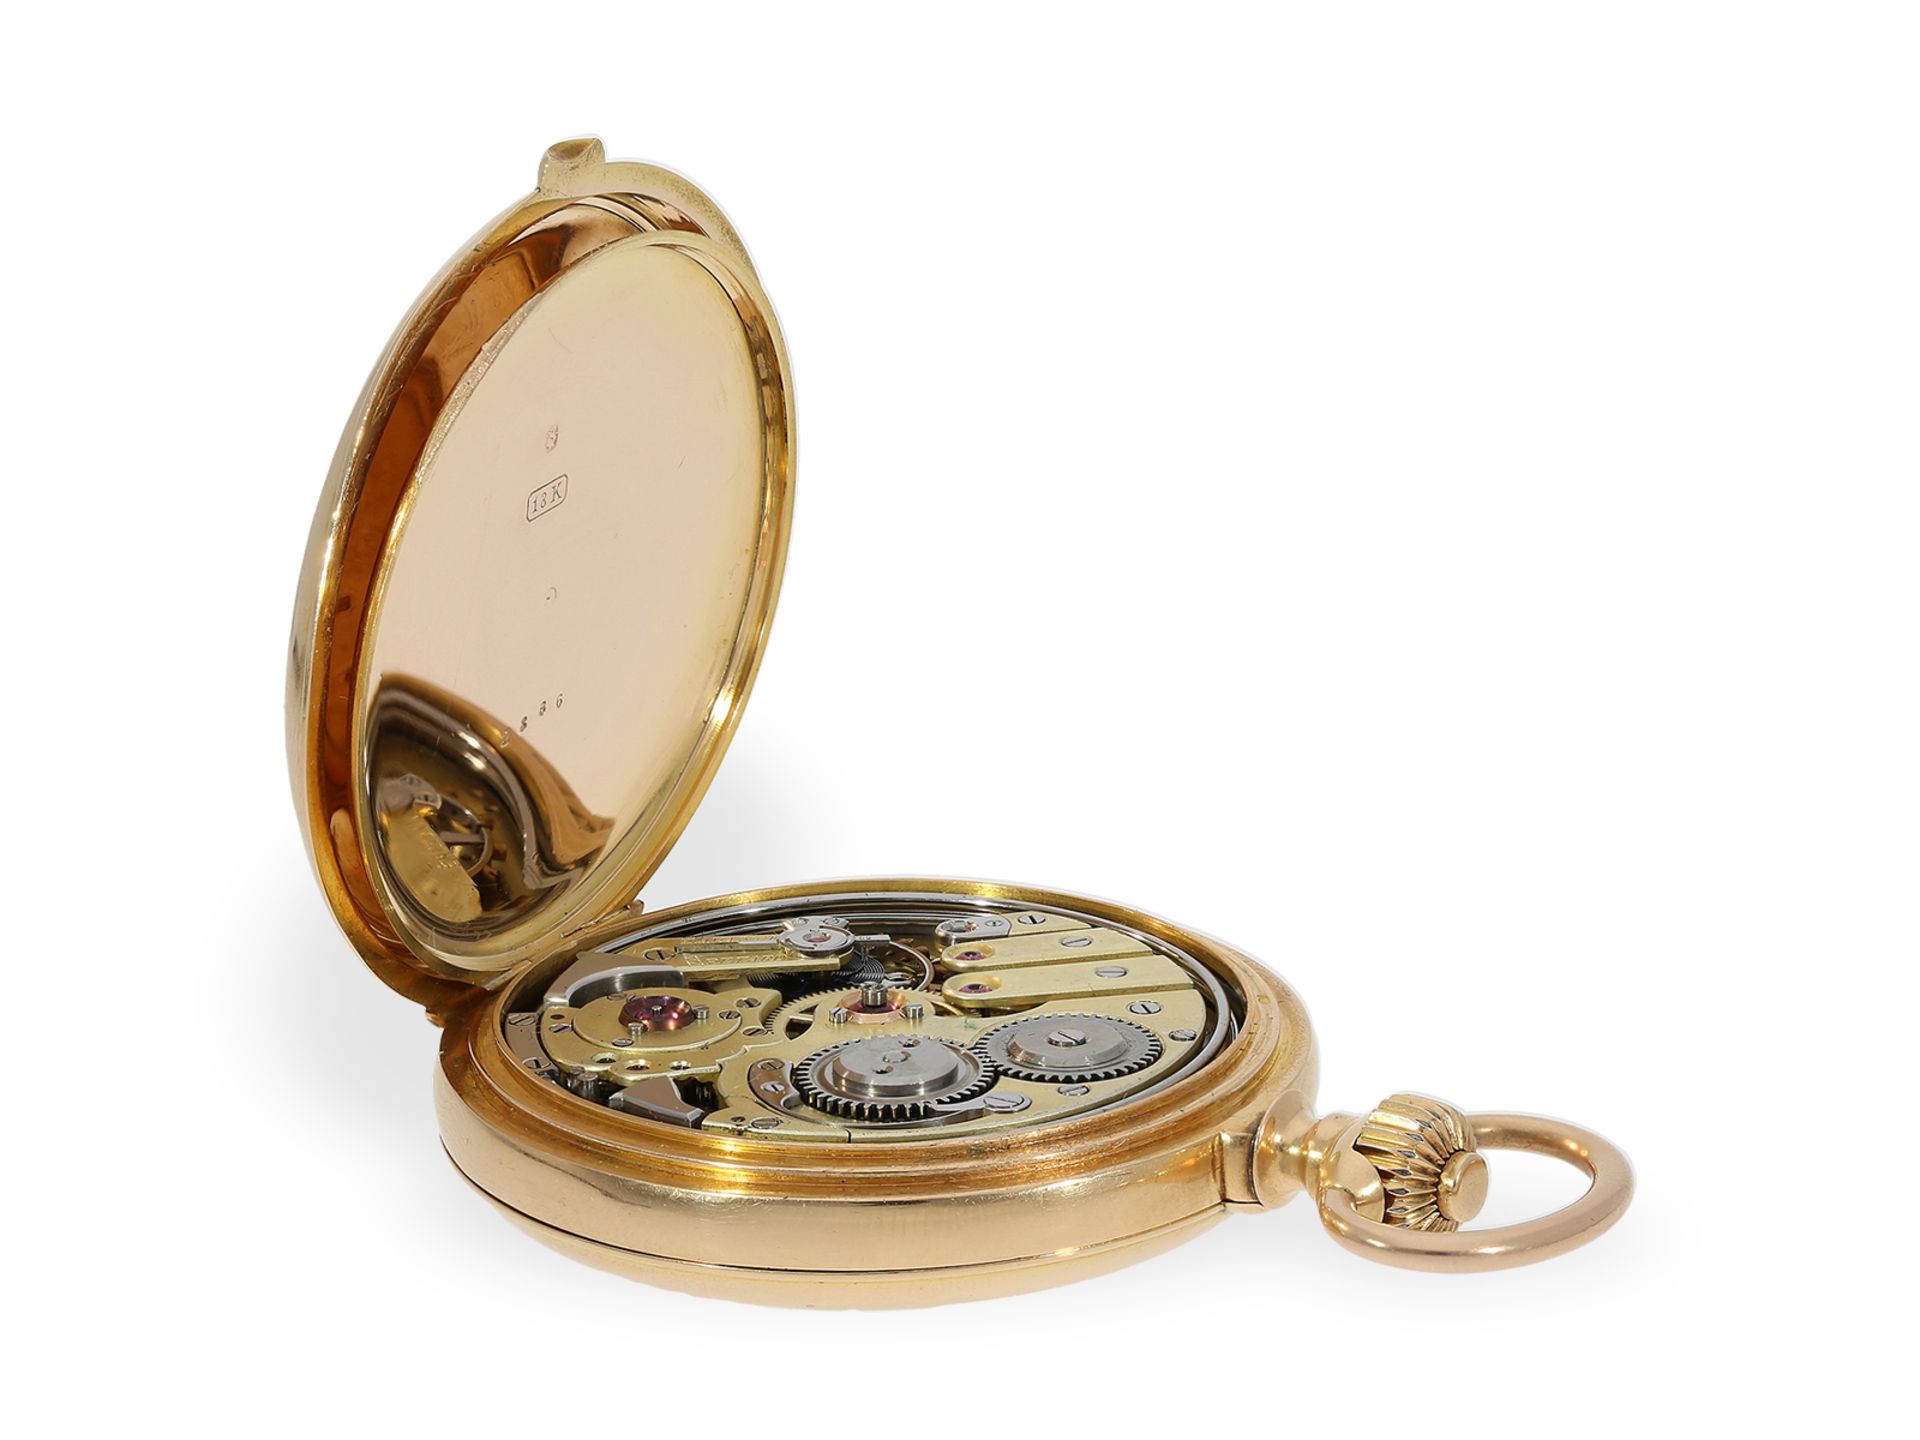 Pocket watch: very fine gold hunting case watch with repeater, probably Audemars Freres, ca. 1880 - Image 4 of 7